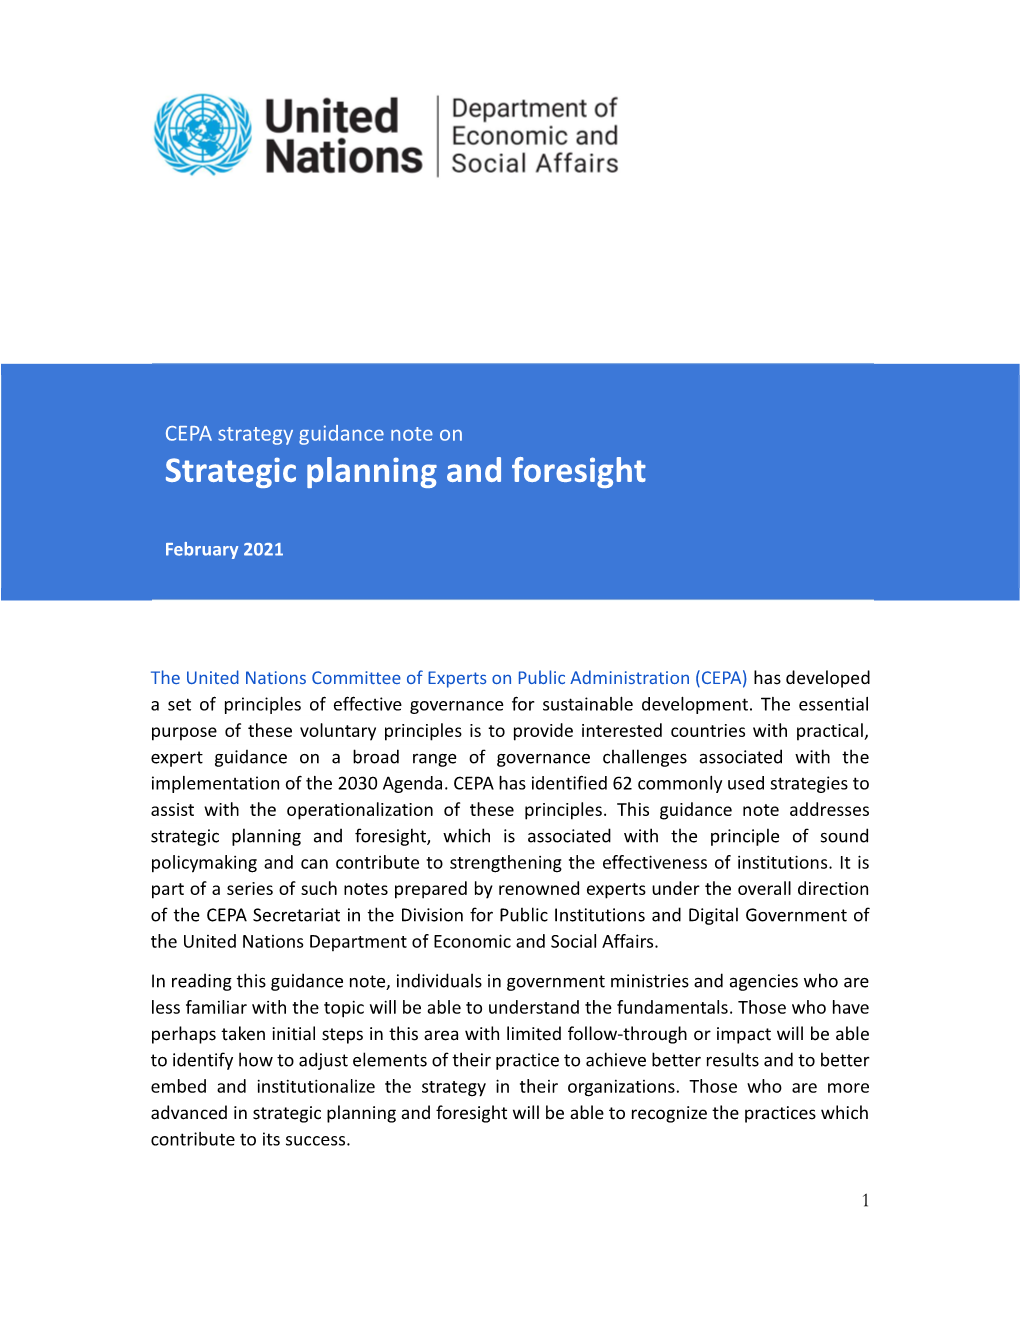 Strategic Planning and Foresight